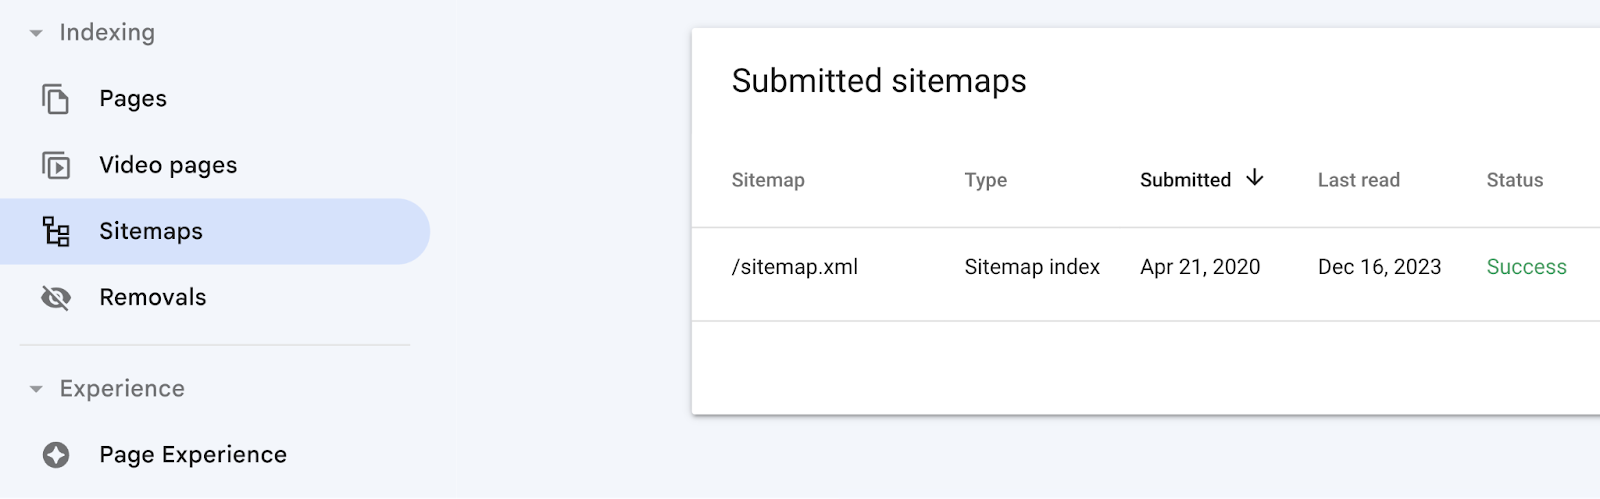 “Sitemaps” section in GSC